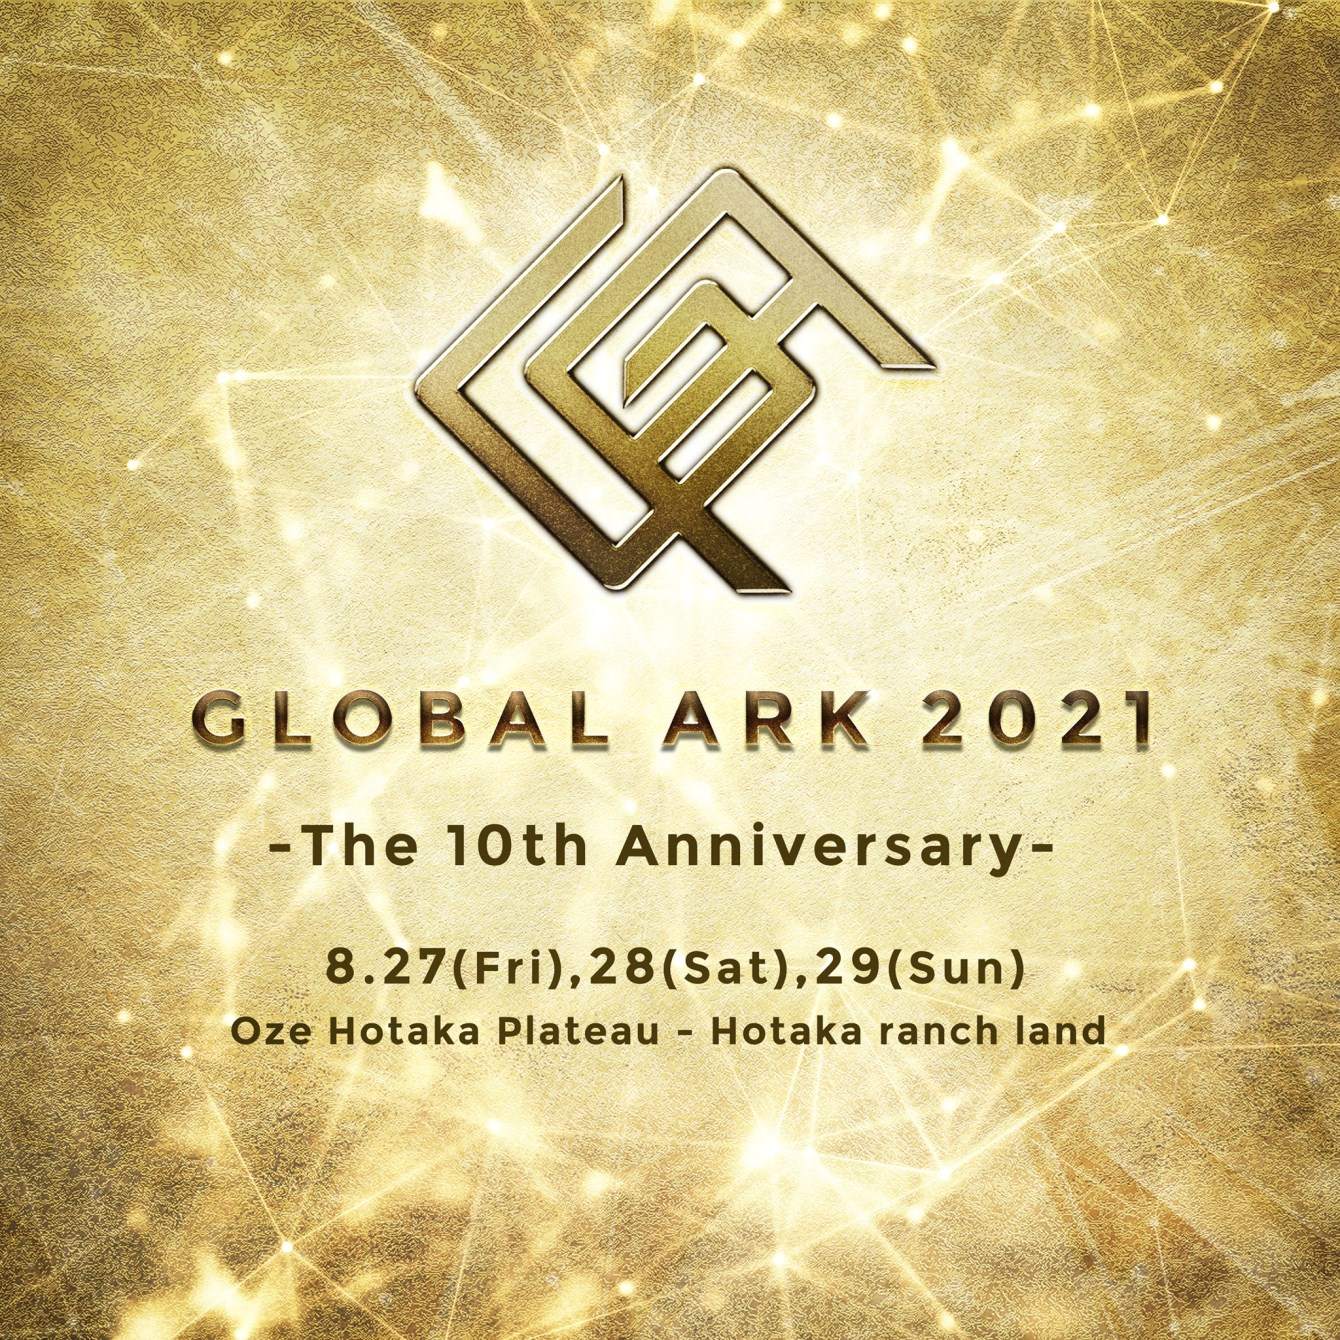 GLOBAL ARK 2021 -The 10th Anniversary in OZE - - Página frontal